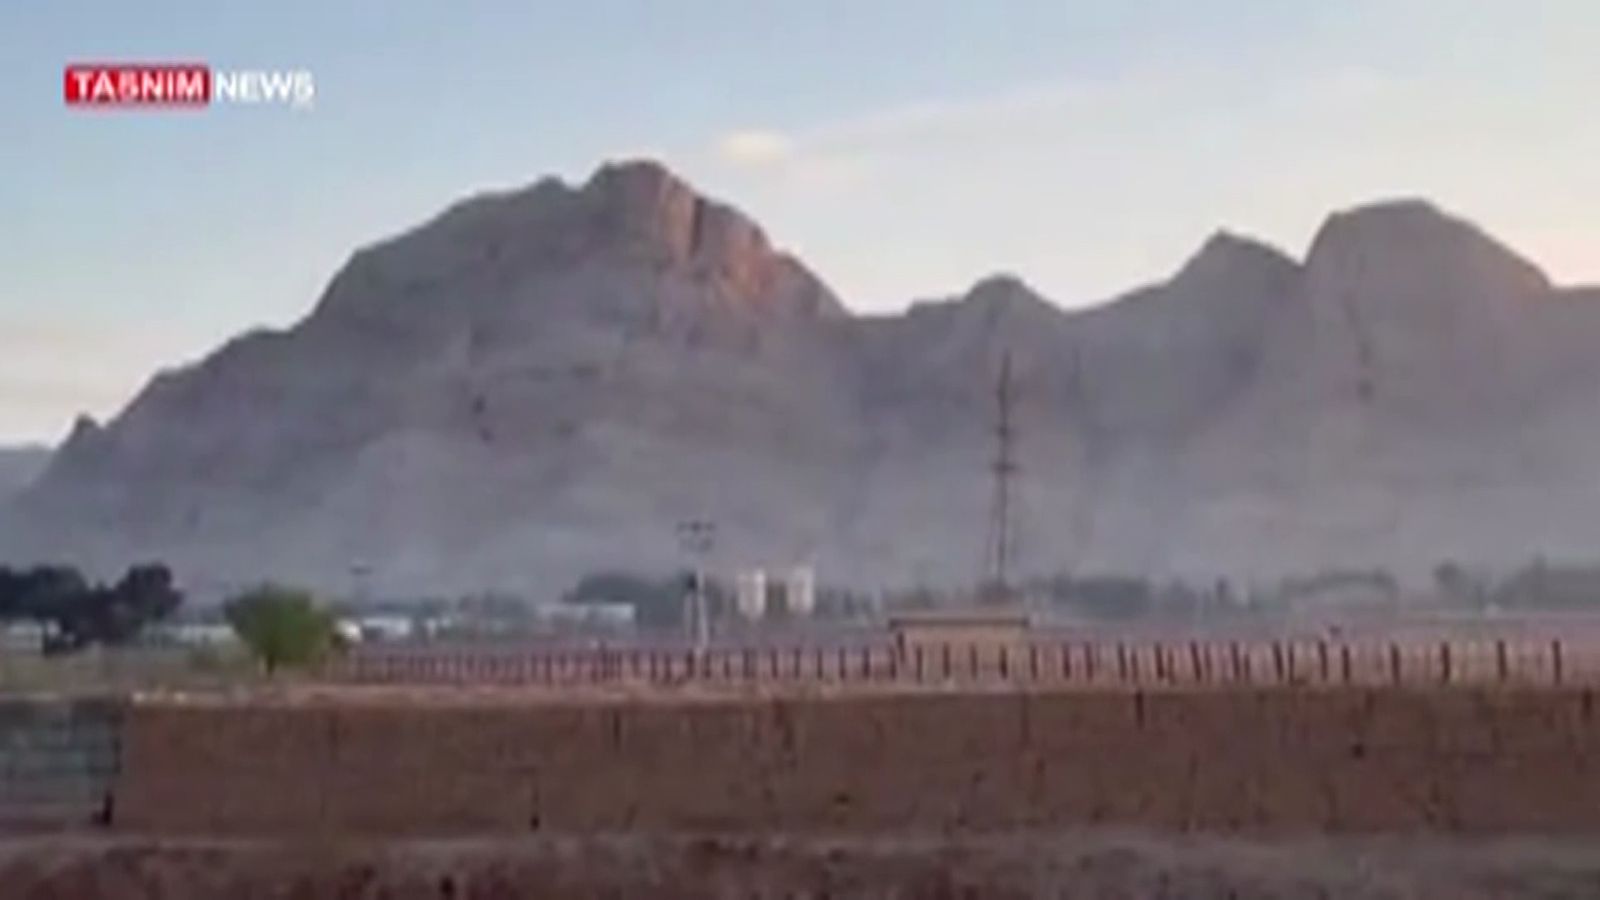 Israel strikes Iran but UN says nuclear sites safe after explosions near city of Isfahan